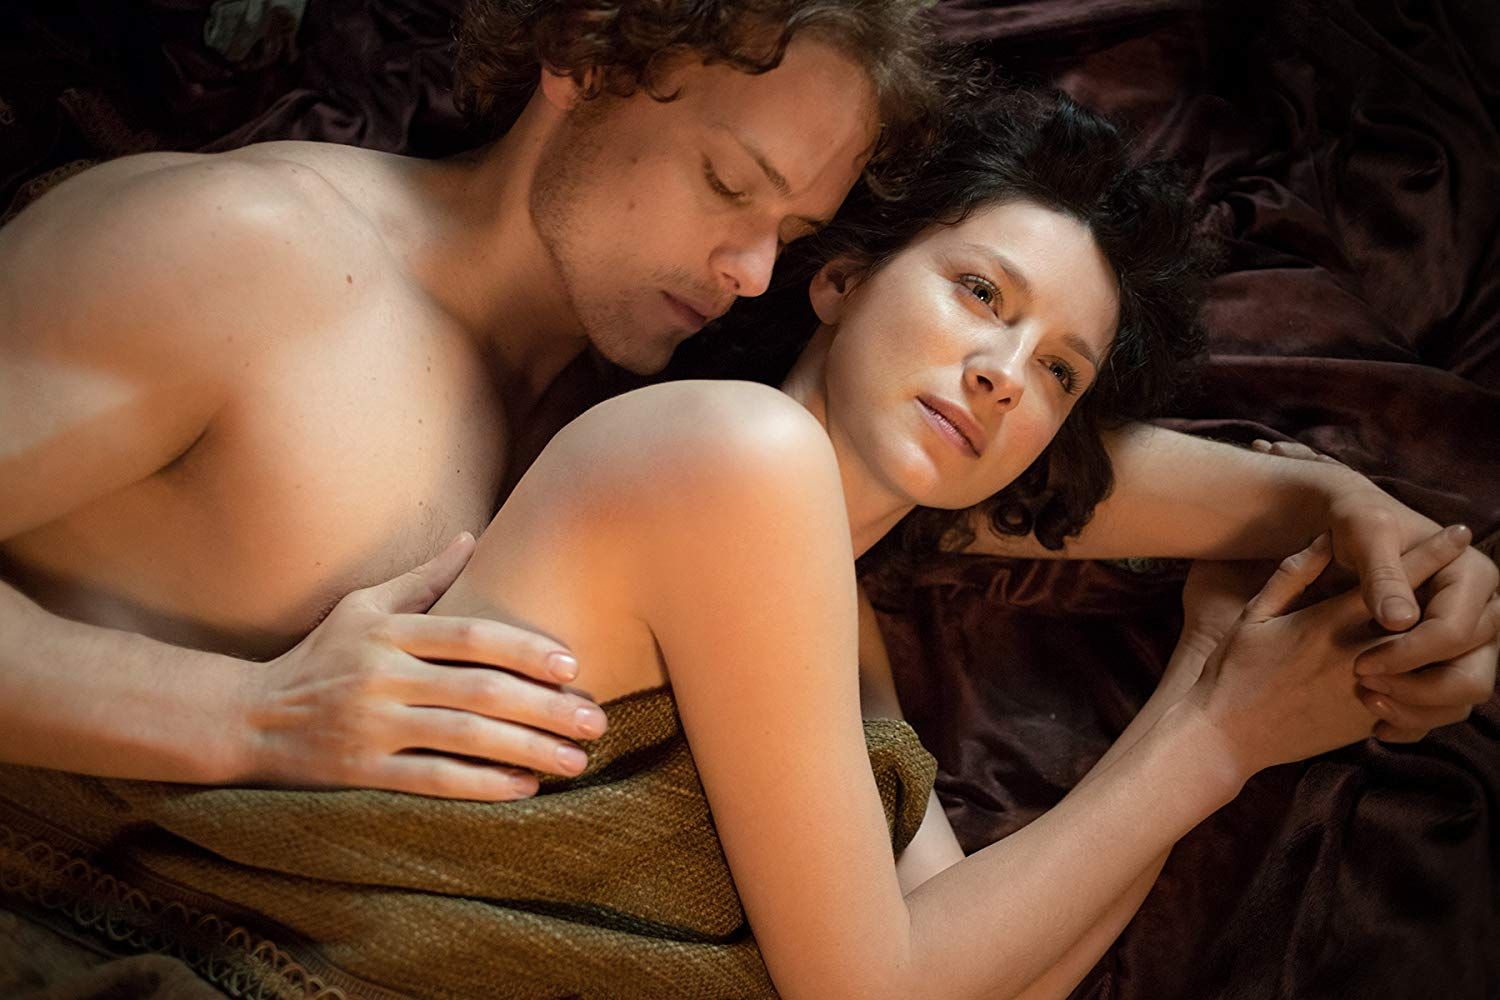 Does outlander have a lot of sex scenes